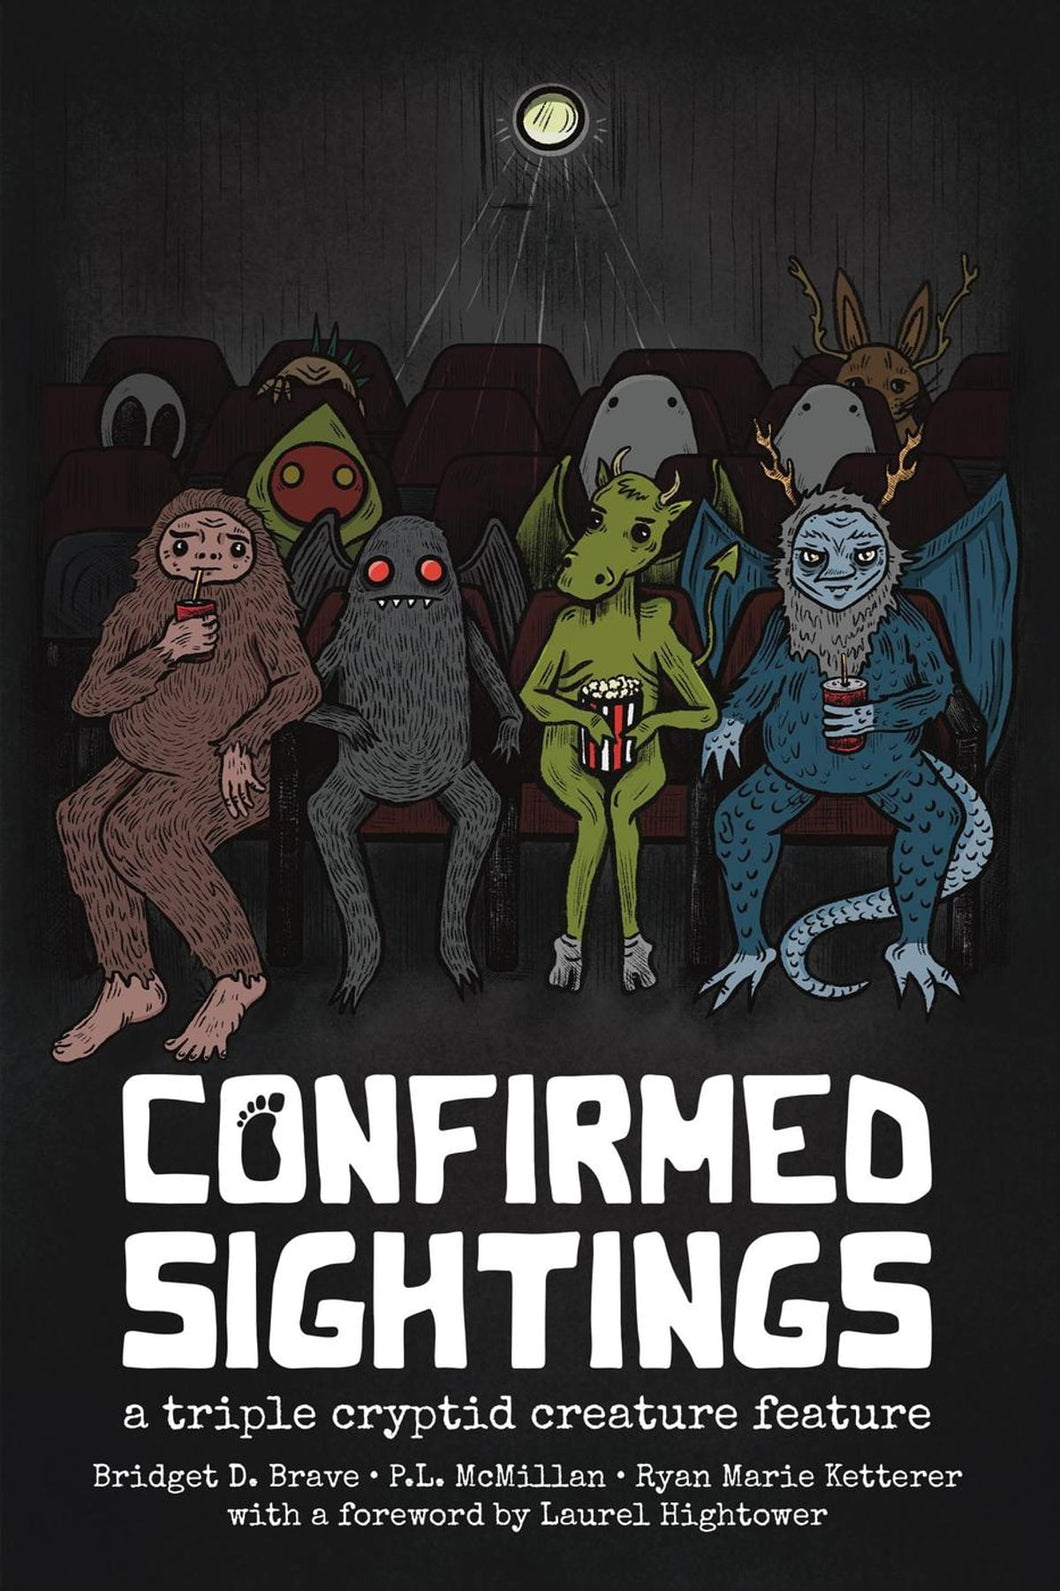 Confirmed Sightings: A Triple Cryptid Creature Feature
Book by Bridget D. Brave, P. L. McMillan, and Ryan Marie Ketterer Bigfoot Sasquatch